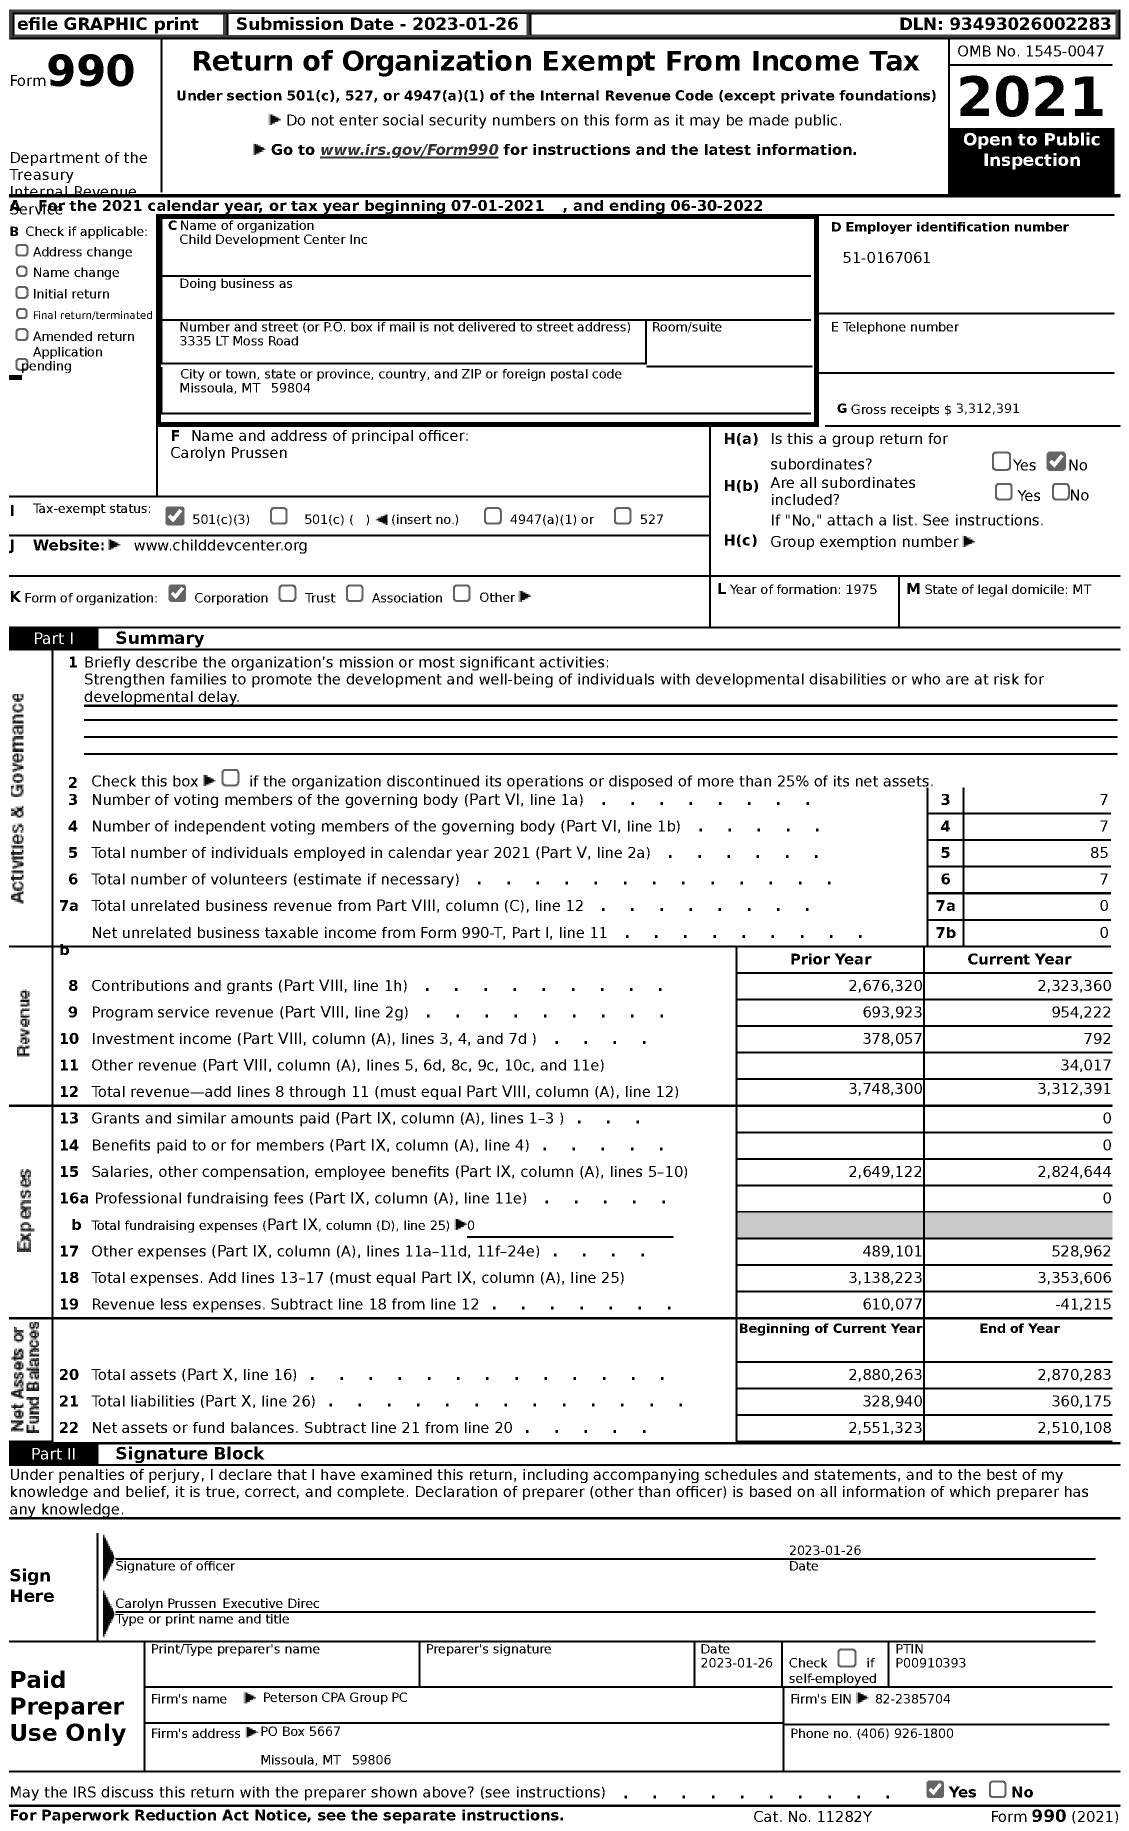 Image of first page of 2021 Form 990 for Child Development Center (CDC)